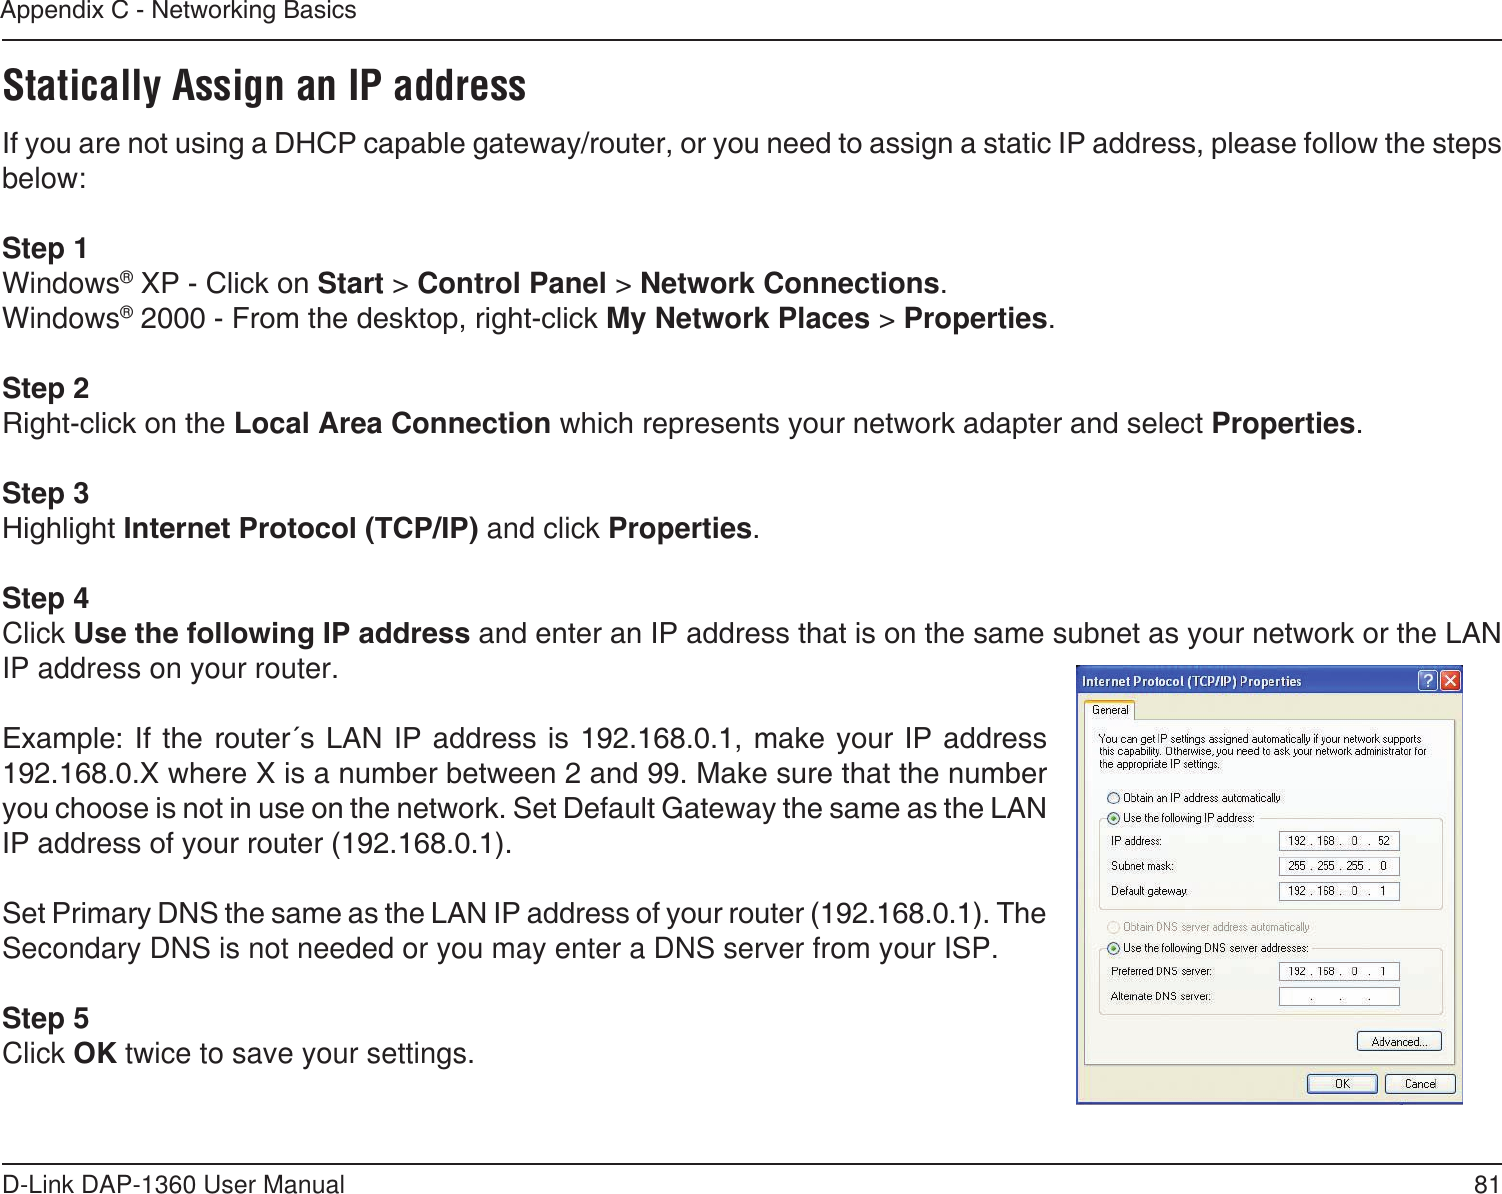 81D-Link DAP-1360 User ManualAppendix C - Networking BasicsStatically Assign an IP addressIf you are not using a DHCP capable gateway/router, or you need to assign a static IP address, please follow the steps below:Step 1Windows® XP - Click on Start &gt; Control Panel &gt; Network Connections.Windows® 2000 - From the desktop, right-click My Network Places &gt; Properties.Step 2Right-click on the Local Area Connection which represents your network adapter and select Properties.Step 3Highlight Internet Protocol (TCP/IP) and click Properties.Step 4Click Use the following IP address and enter an IP address that is on the same subnet as your network or the LAN IP address on your router. Example: If the  router´s LAN  IP address  is 192.168.0.1,  make your  IP address 192.168.0.X where X is a number between 2 and 99. Make sure that the number you choose is not in use on the network. Set Default Gateway the same as the LAN IP address of your router (192.168.0.1). Set Primary DNS the same as the LAN IP address of your router (192.168.0.1). The Secondary DNS is not needed or you may enter a DNS server from your ISP.Step 5Click OK twice to save your settings.